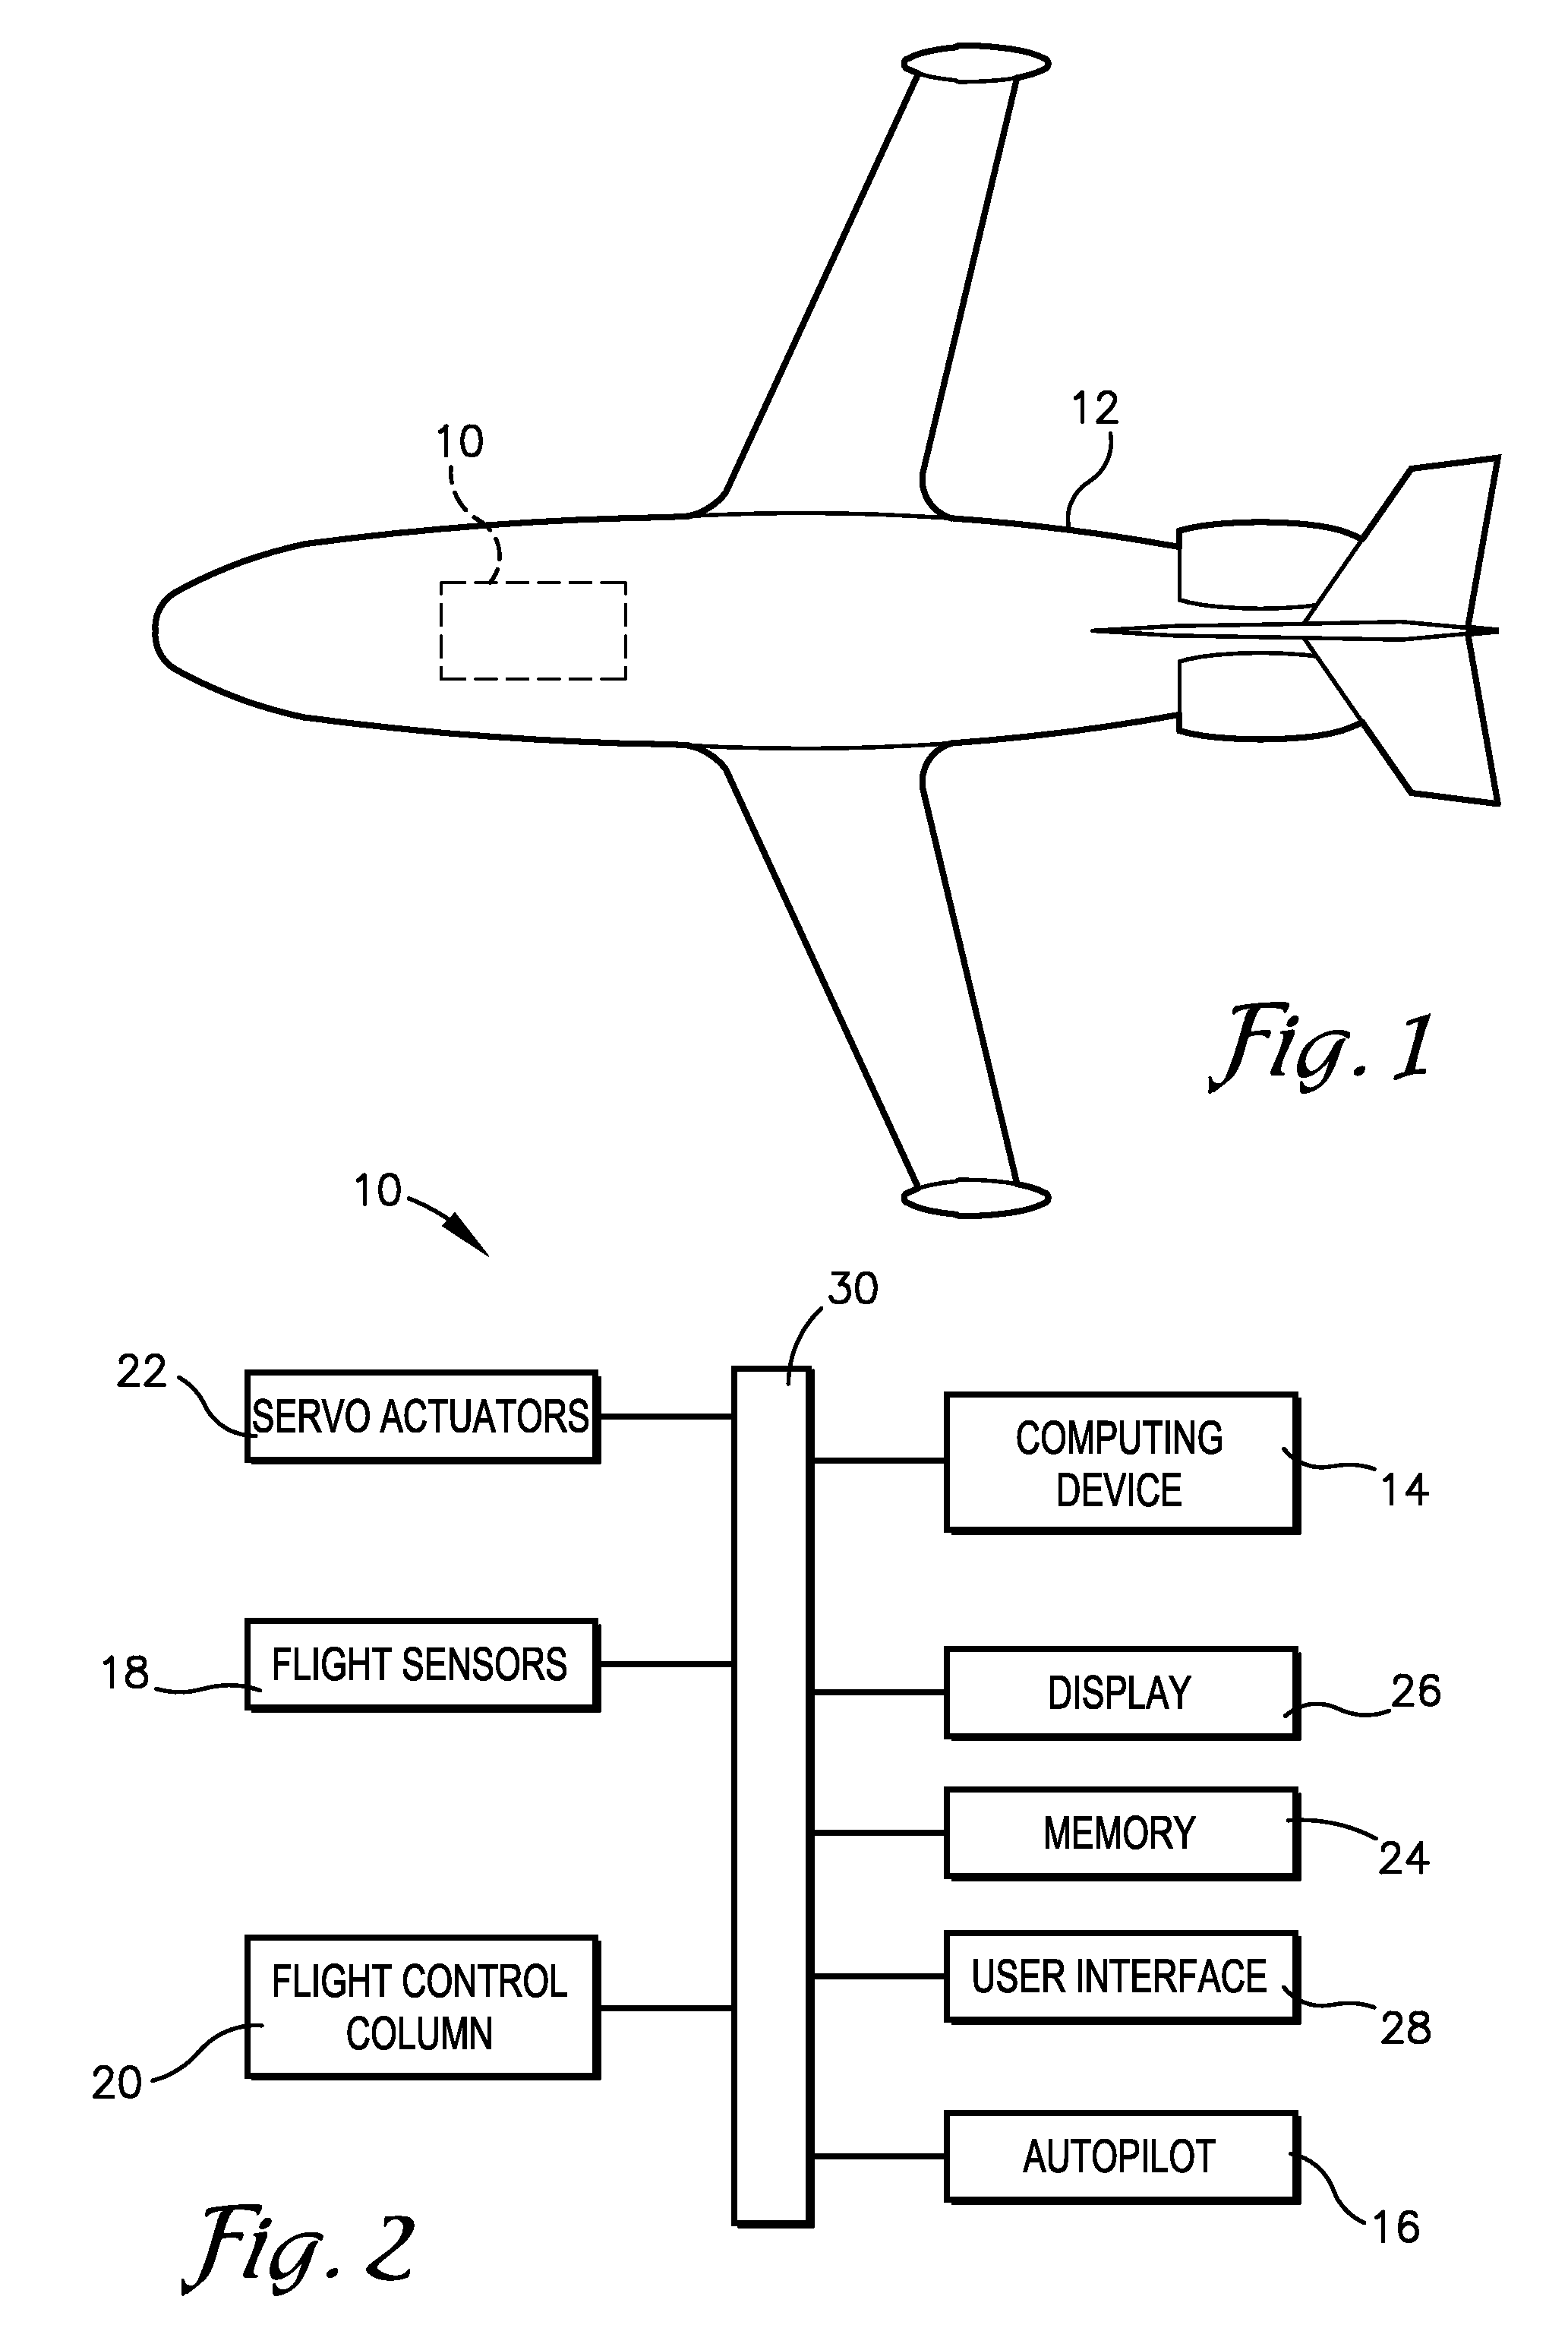 Envelope protection for mechanically-controlled aircraft